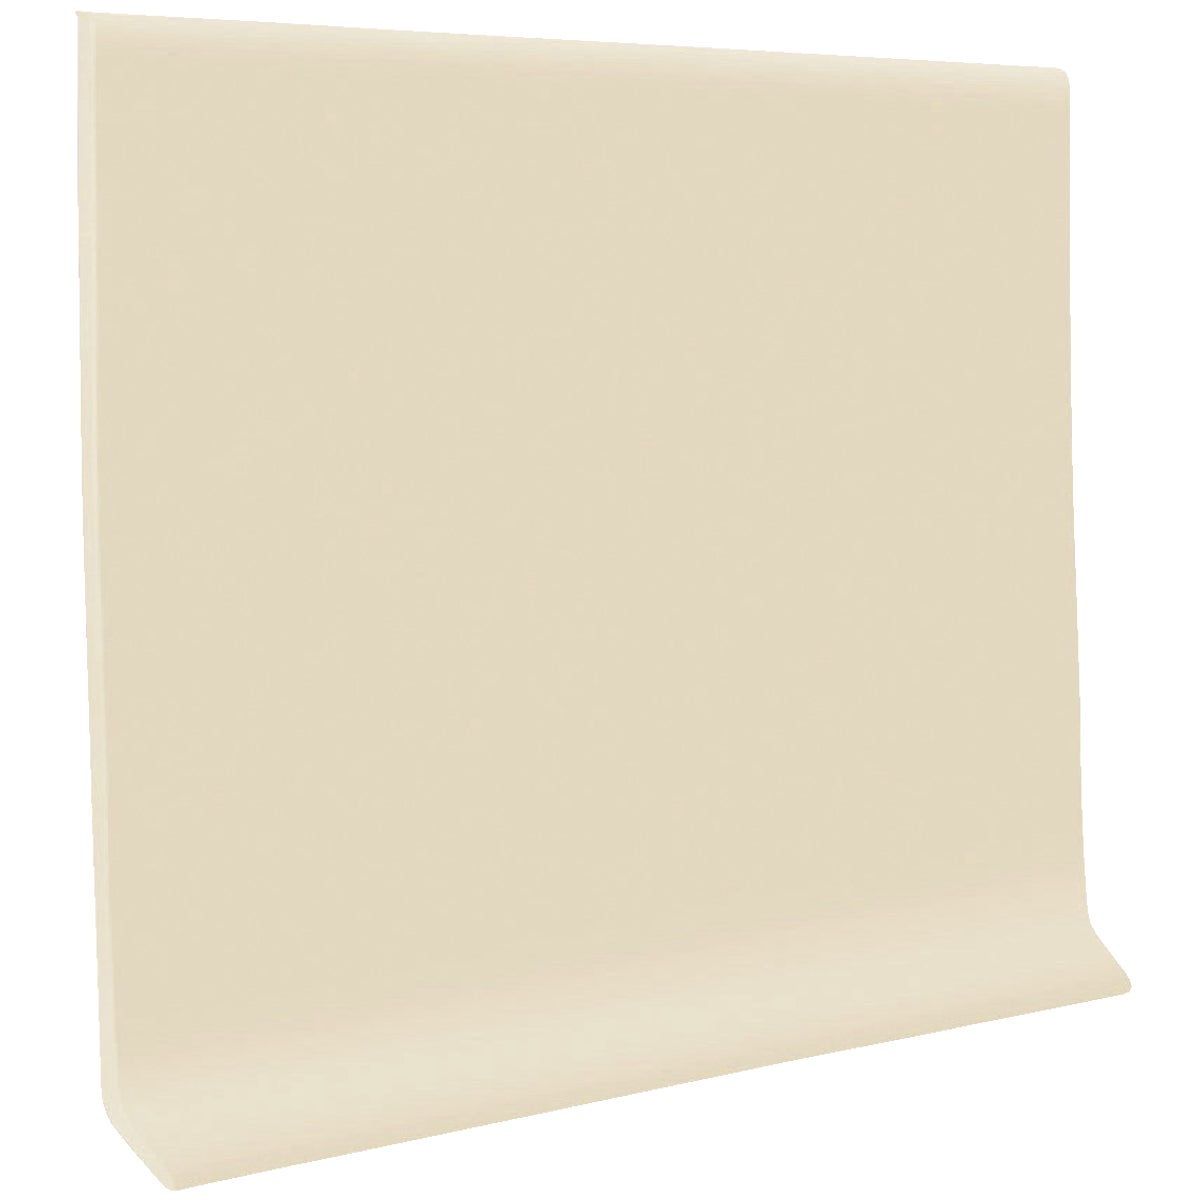 Roppe 2-1/2 In. x 4 Ft. Almond Vinyl Dryback Wall Cove Base